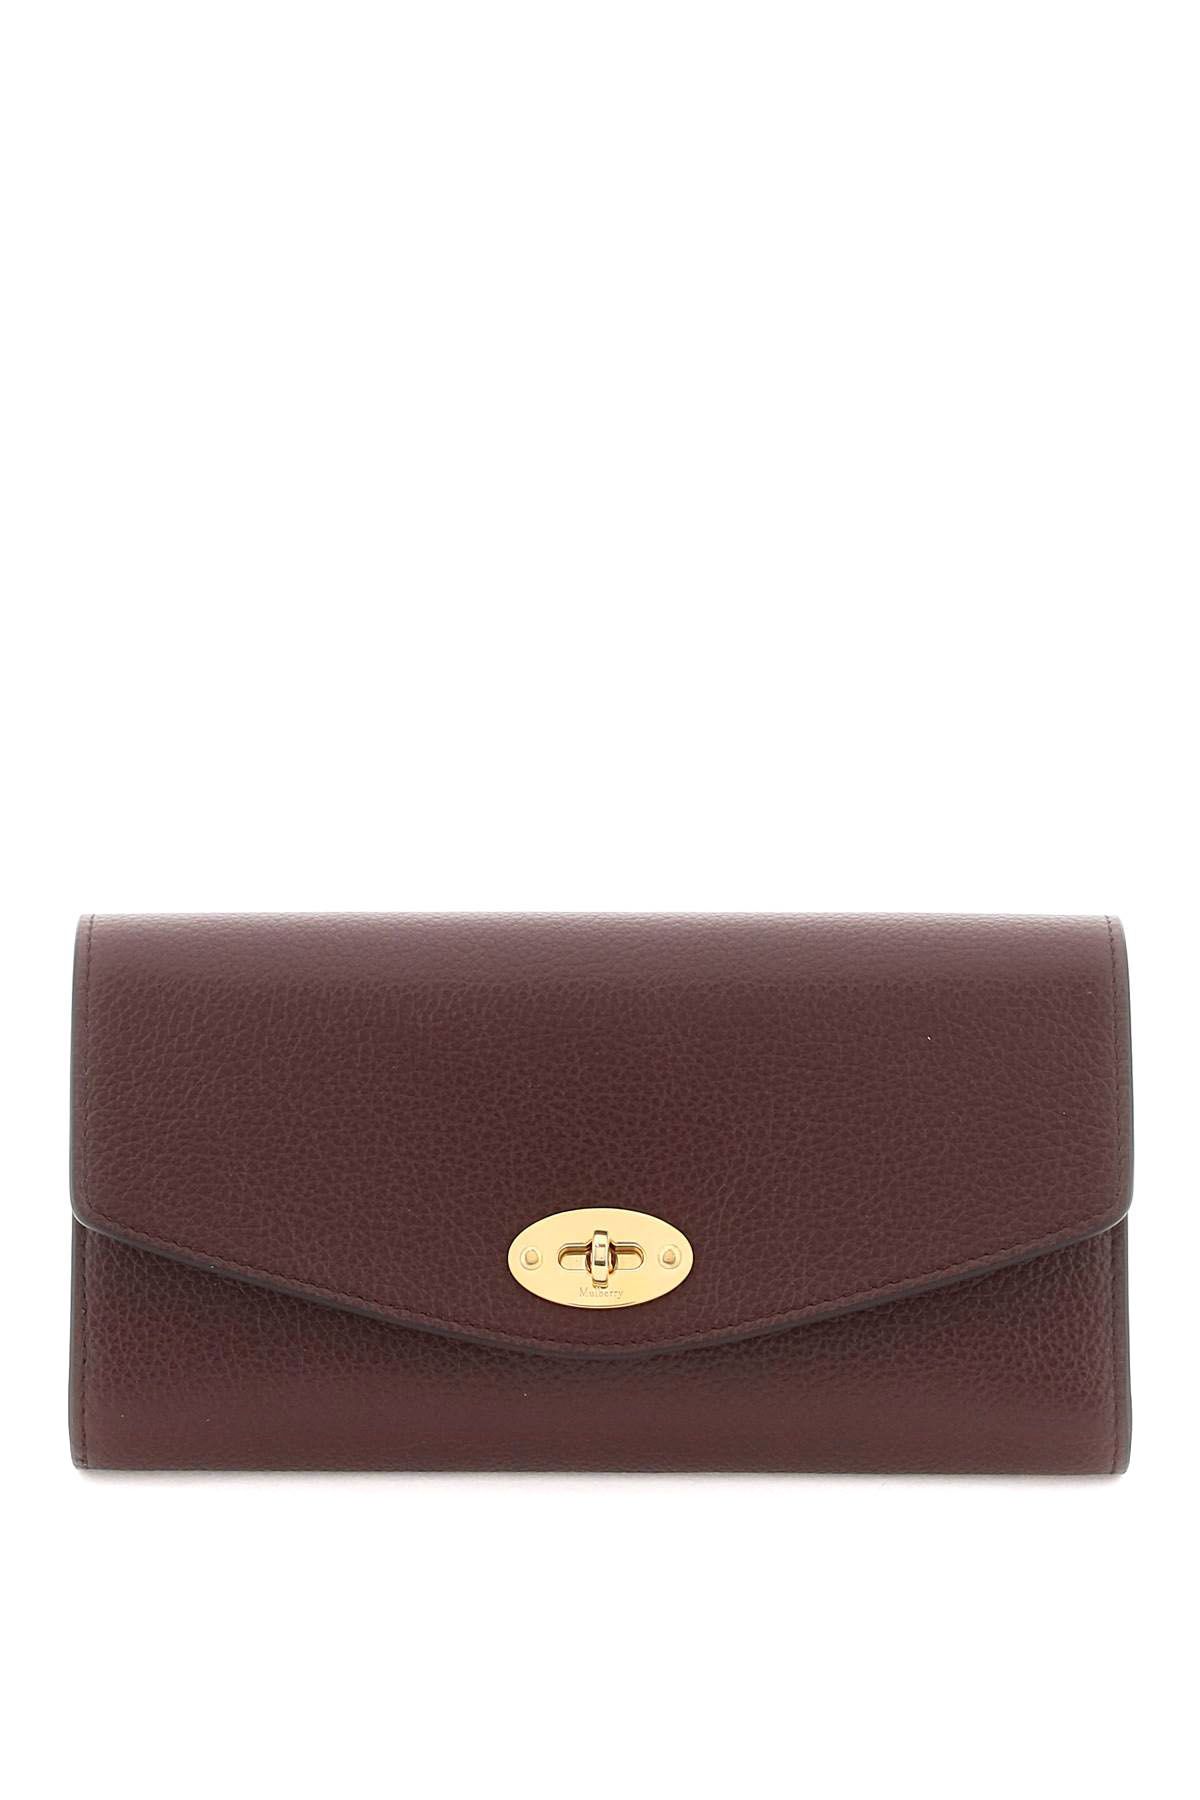 Mulberry Darley Wallet In Red